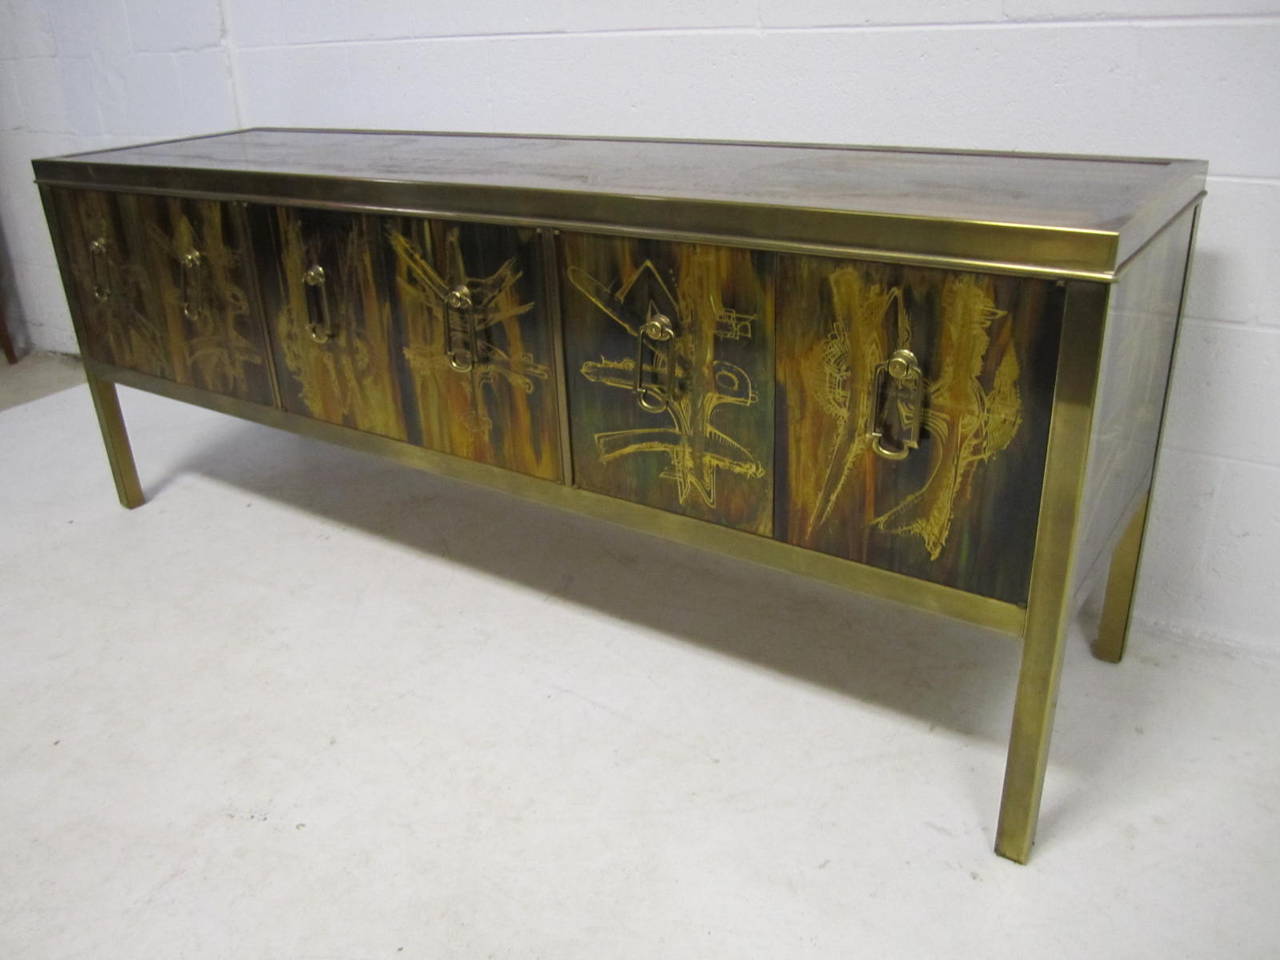 Outstanding Bernhard Rohne for Mastercraft credenza sideboard cabinet. Exceptional six-panel acid etched brass credenza with brass pulls housed in a brass frame. Designed by Bernhard Rohne for Mastercraft. This piece is even more impressive in